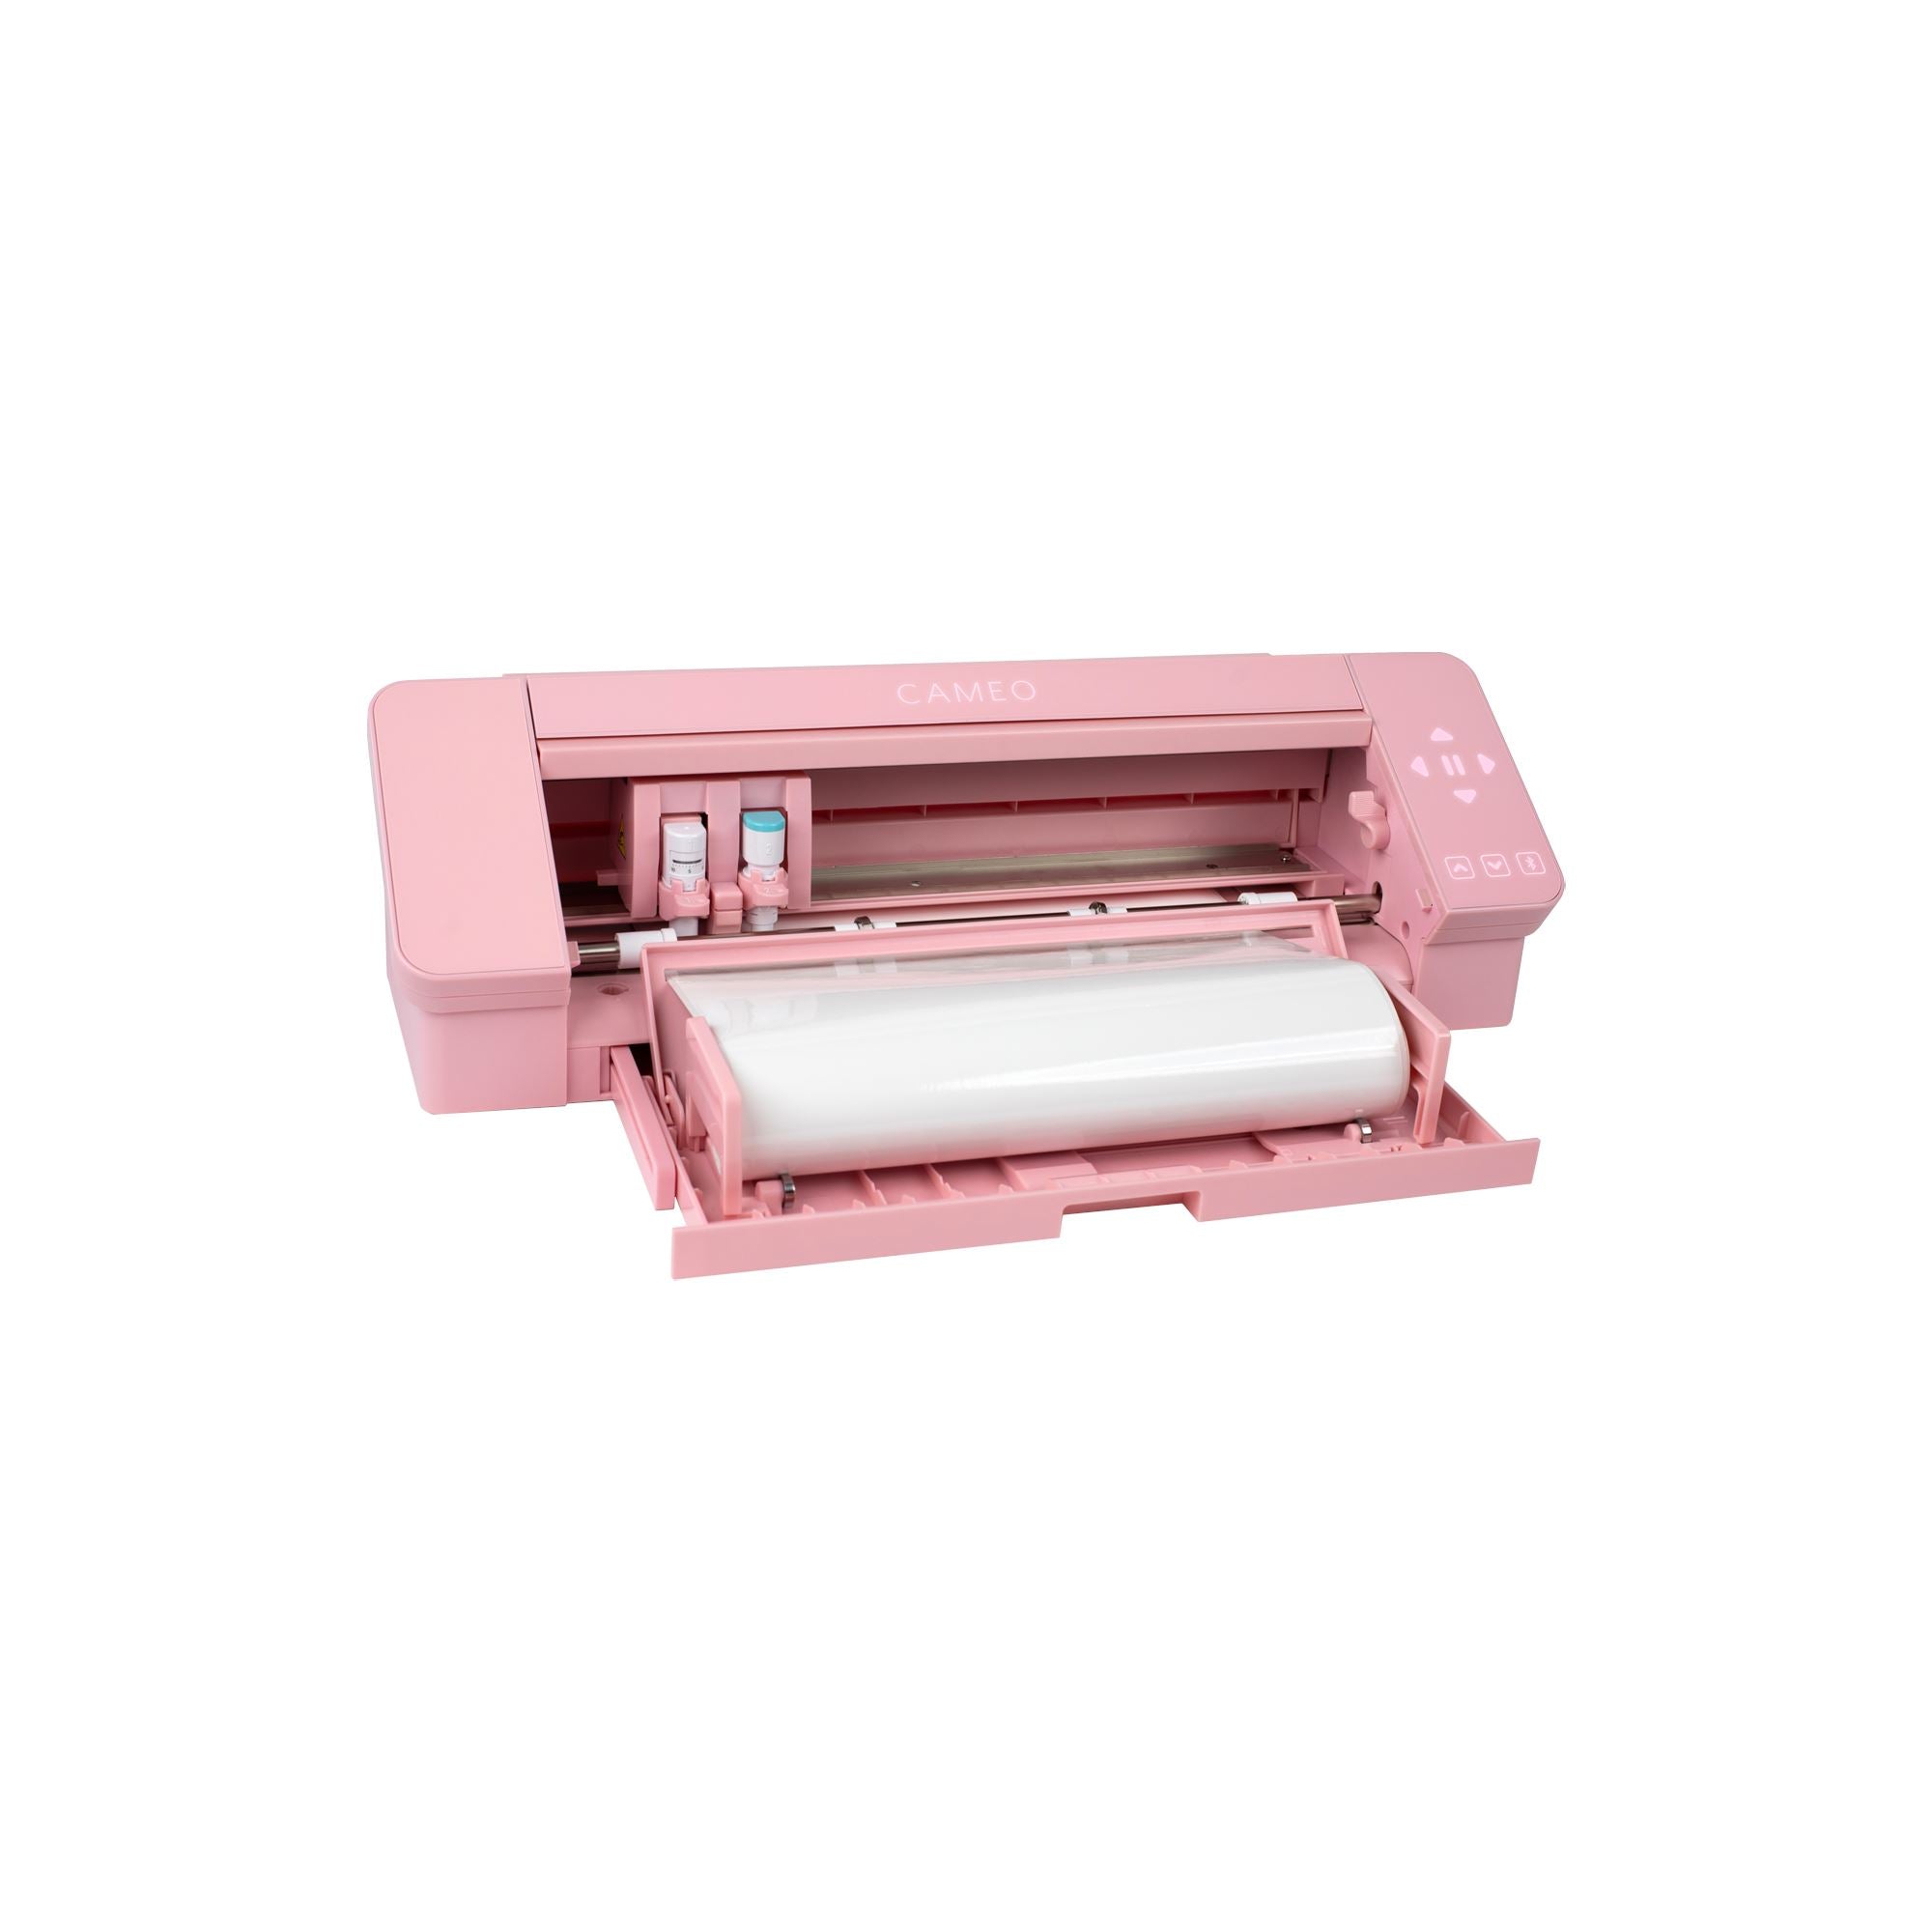 Silhouette Blush Pink Cameo 4 w/ Updated Autoblade, 3X Speed, Roll Feeder